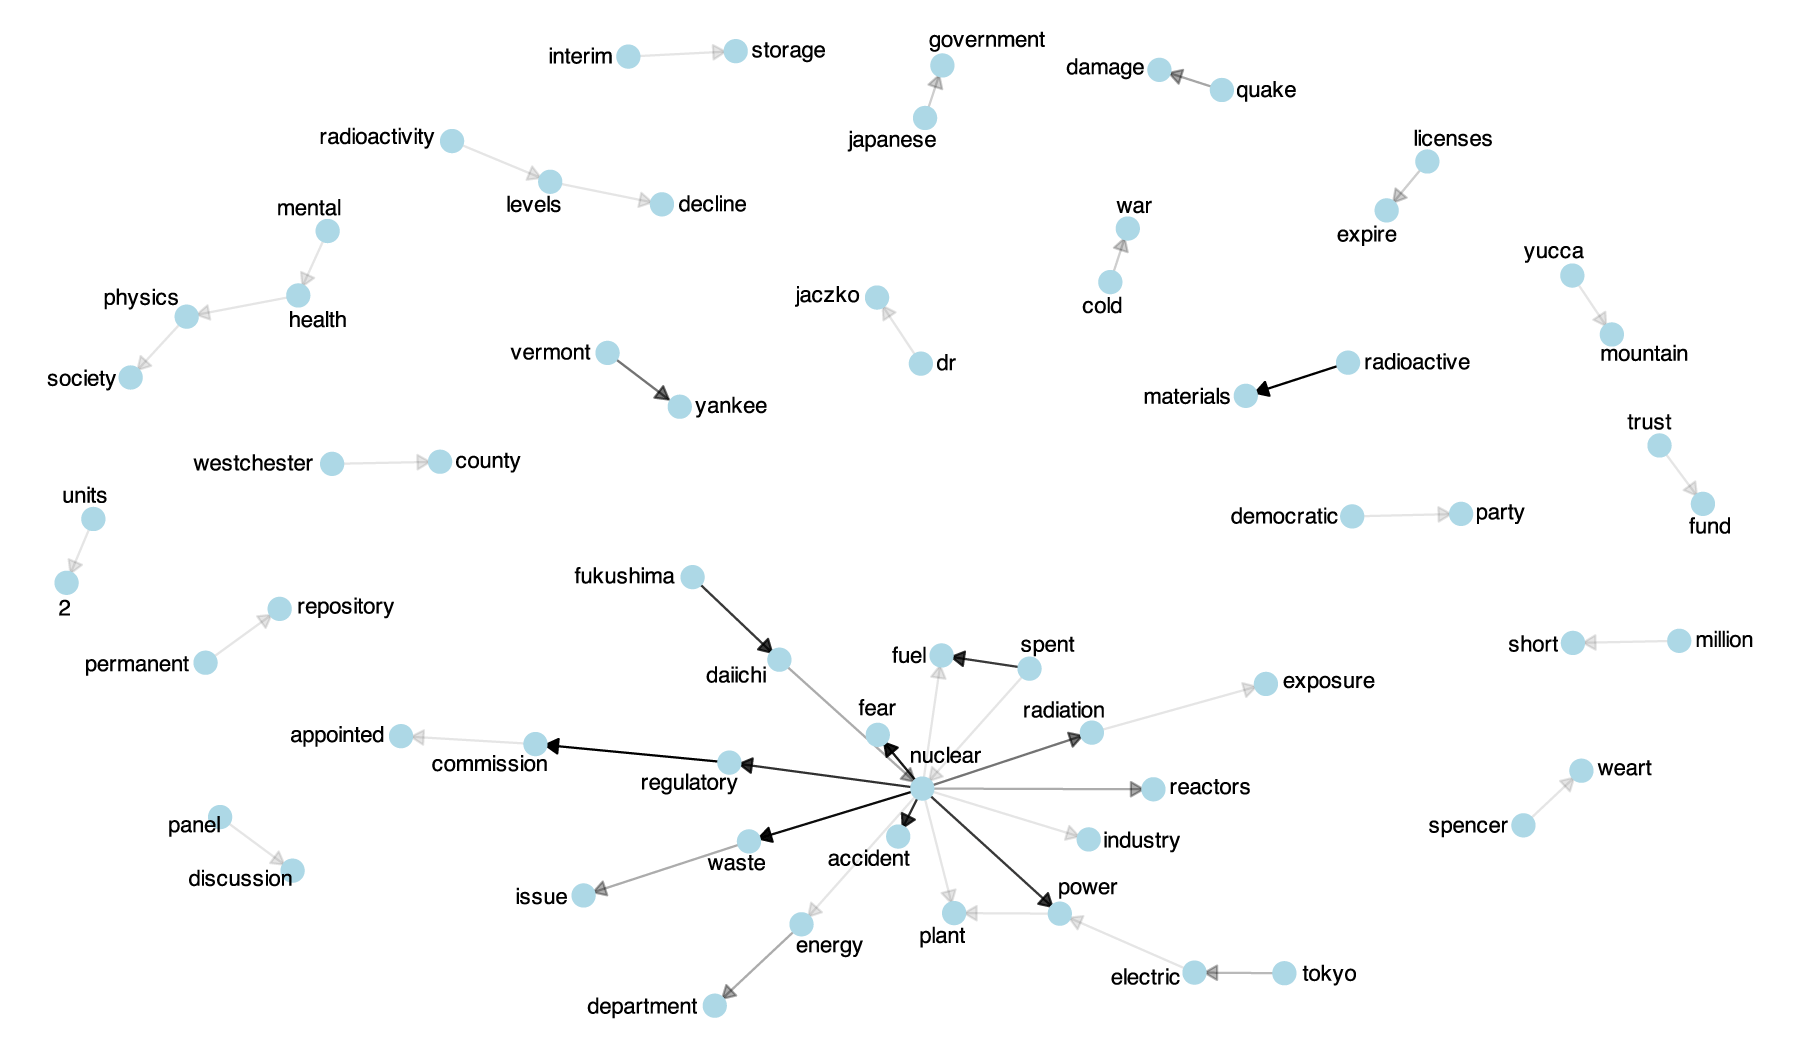 Network map of topics discussed in the news media in 2012